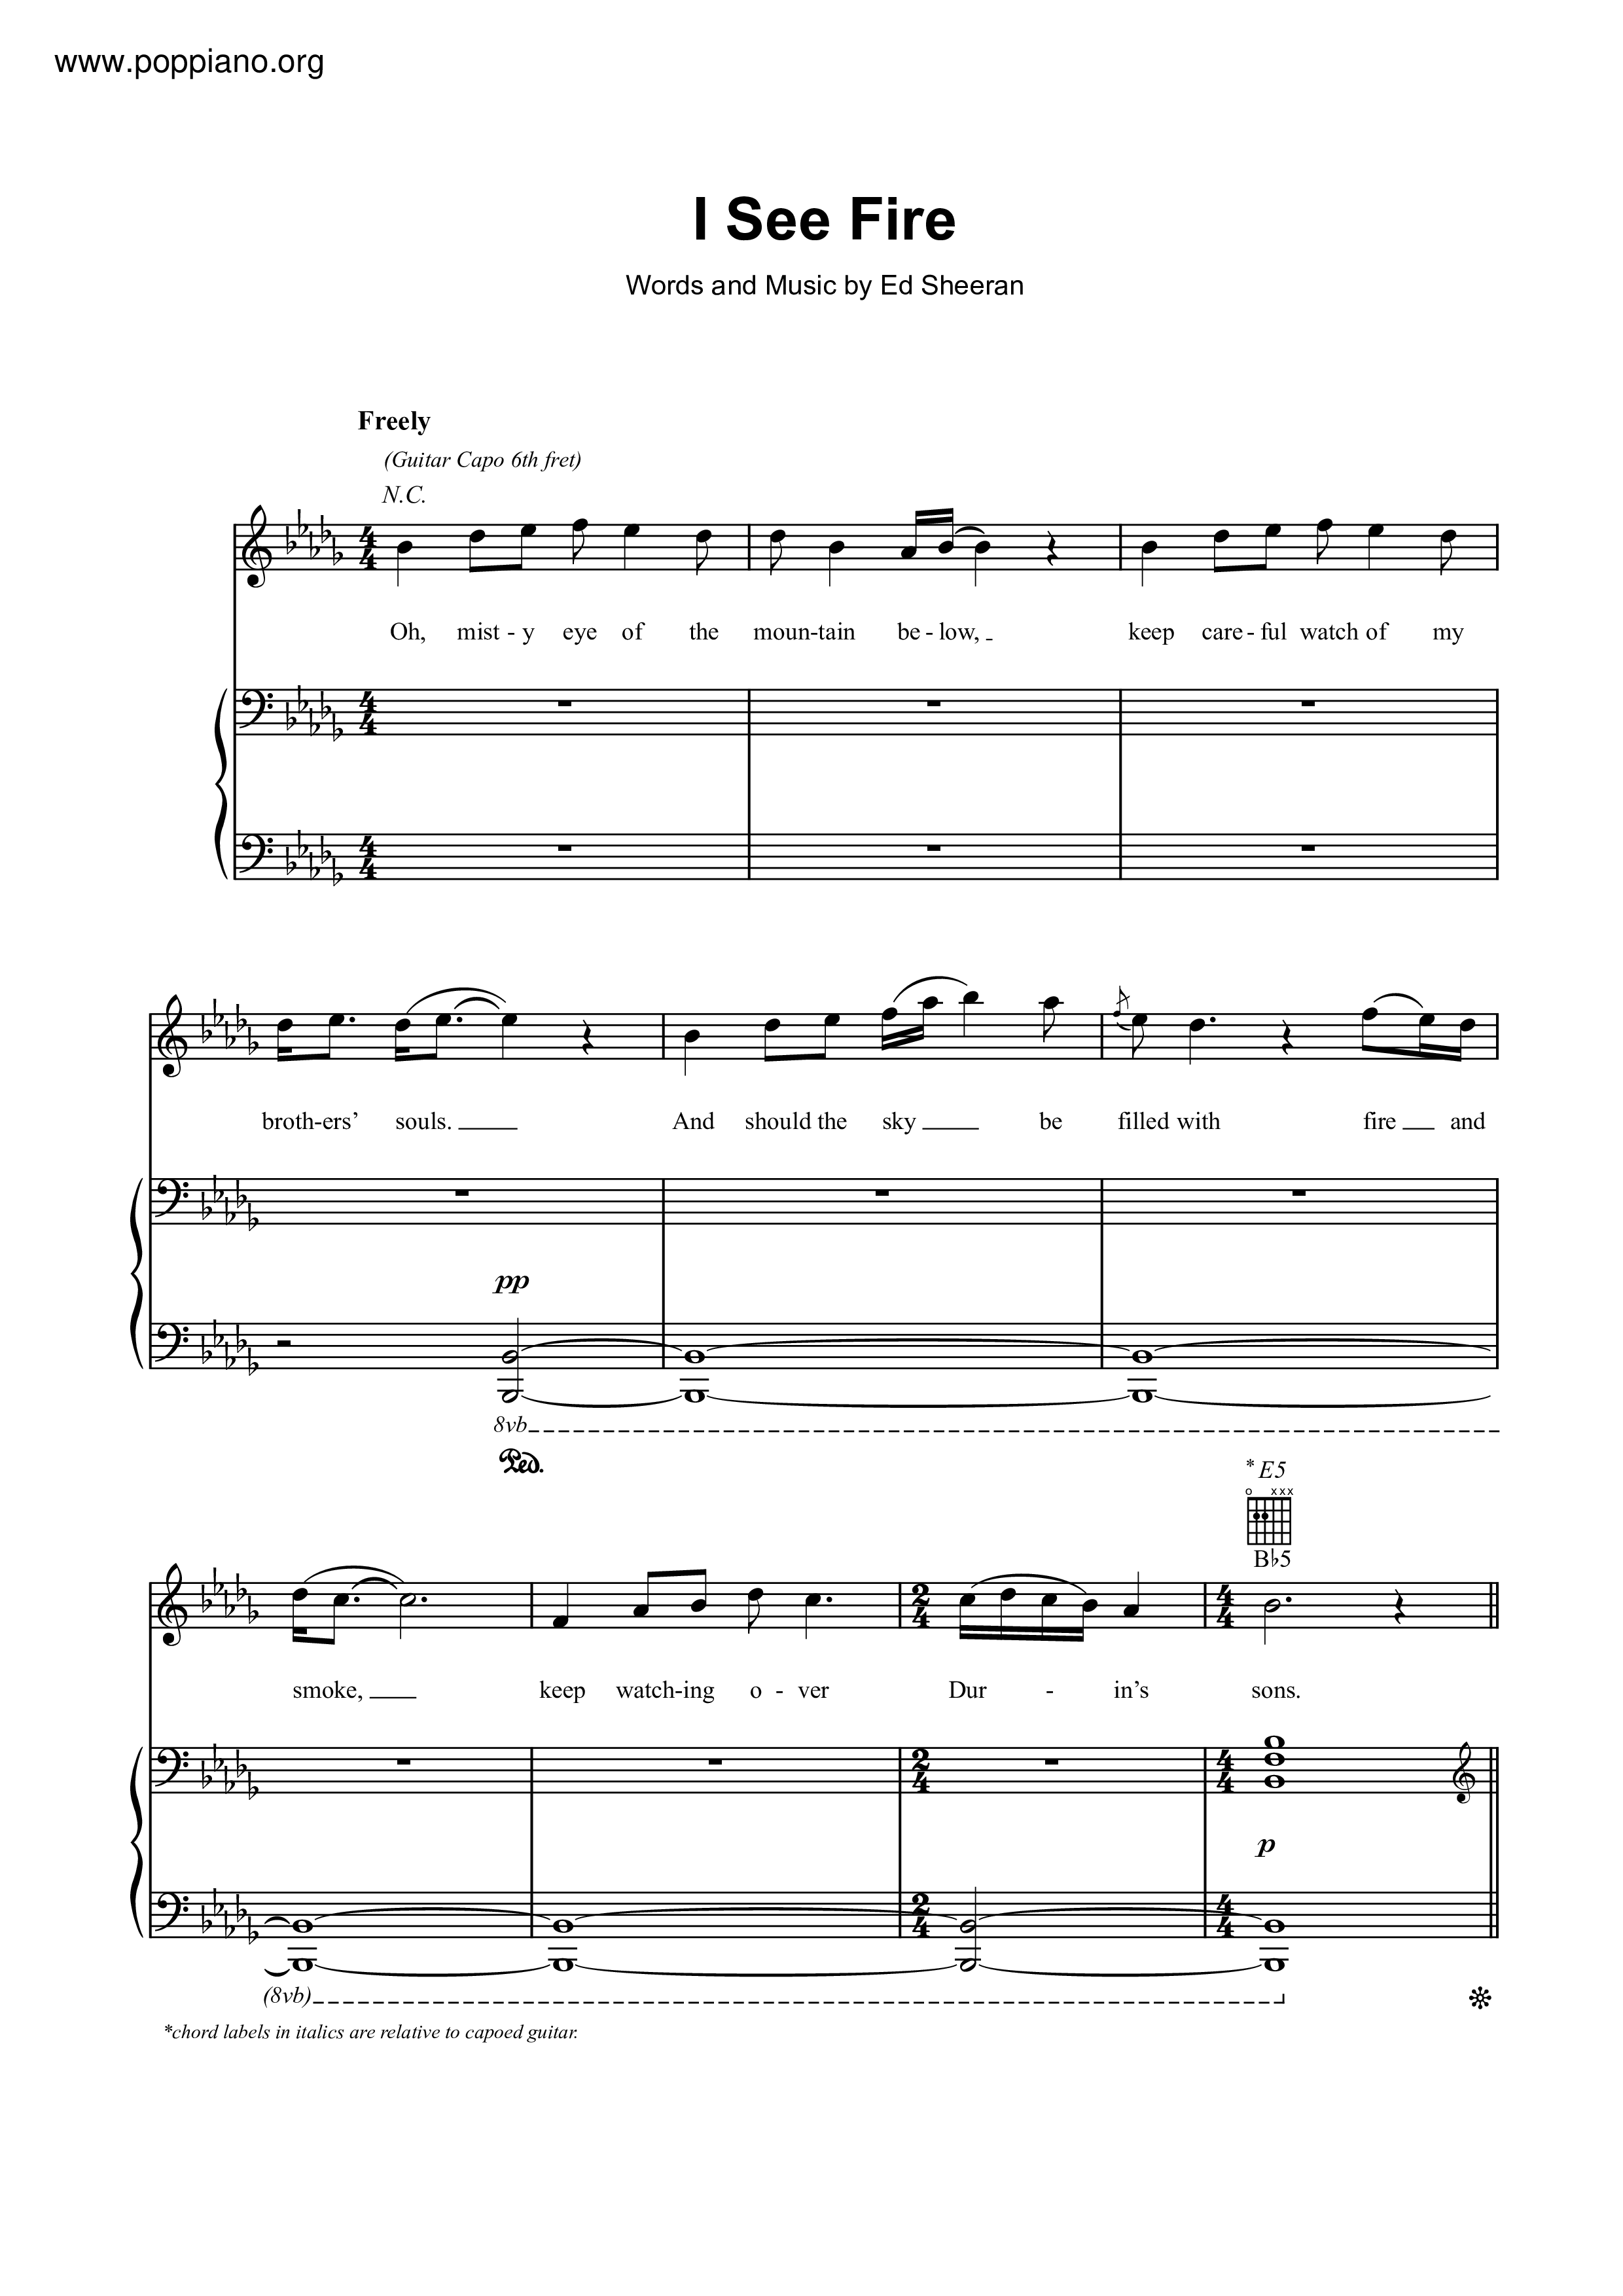 Ed Sheeran I See Fire Chords - Sheet and Chords Collection